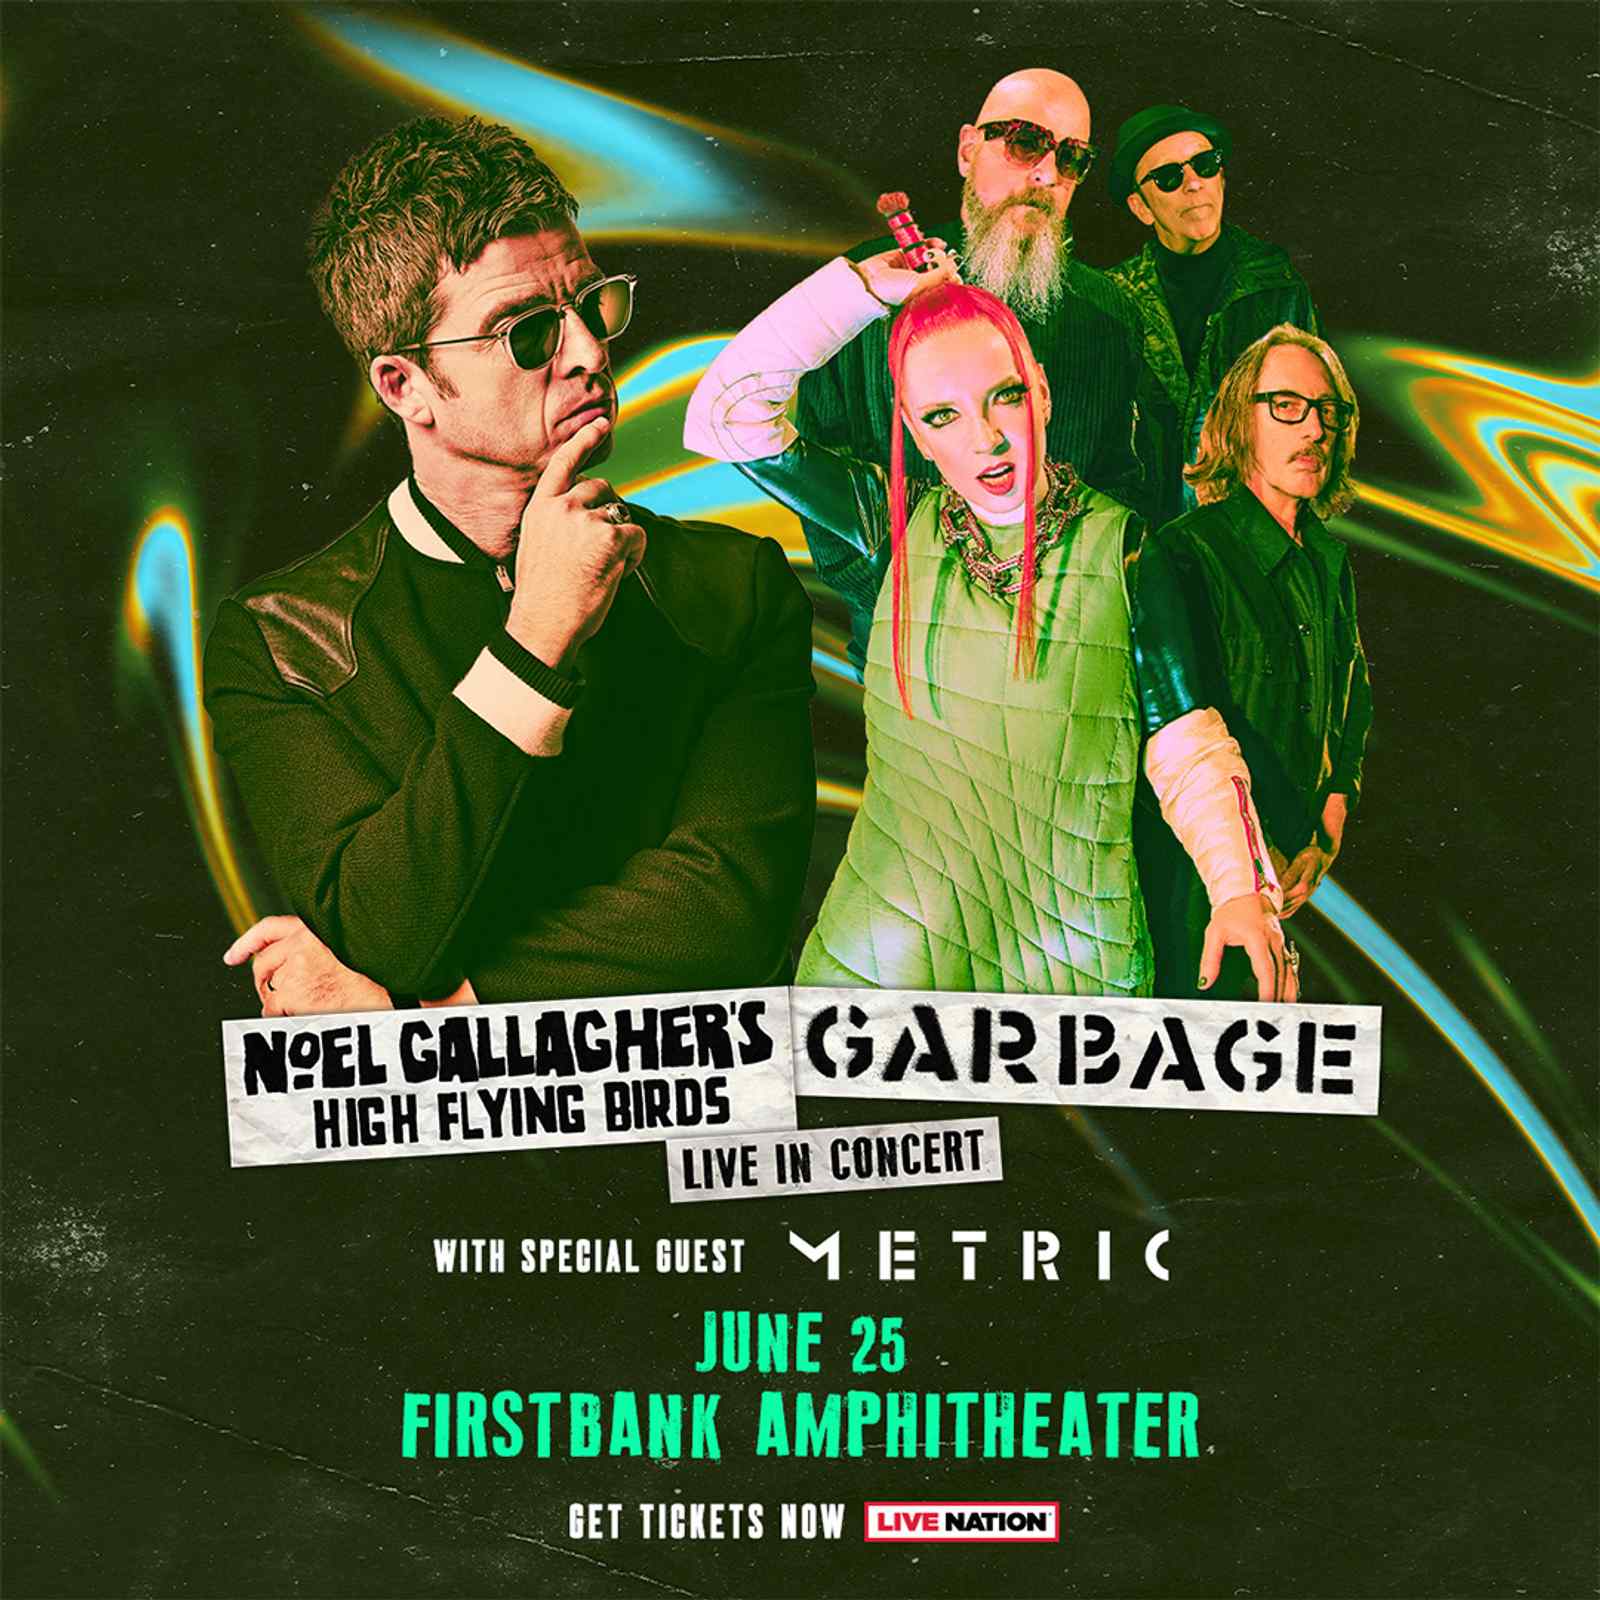 Noel Gallagher's High Flying Birds and Garbage with special guest Metric - 7:00 PM